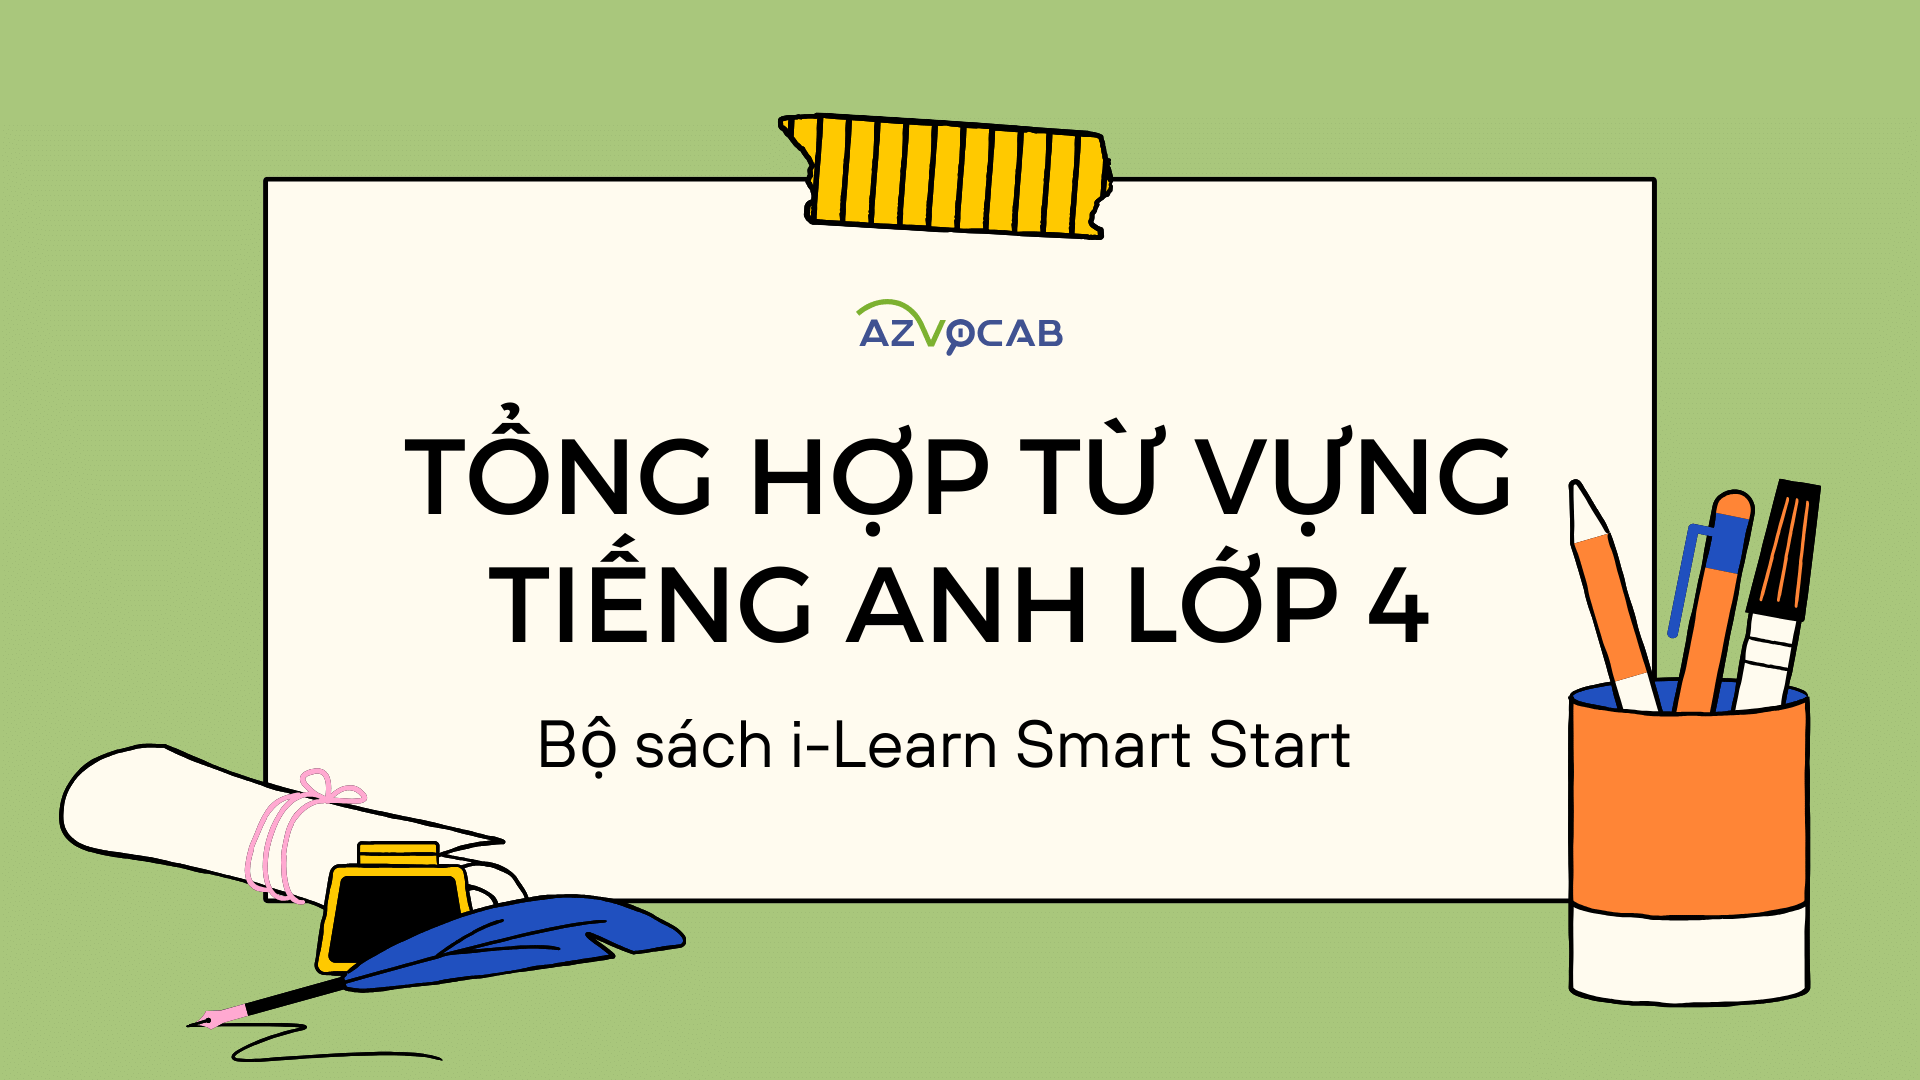 Tiếng Anh lớp 4 i-Learn Smart Start